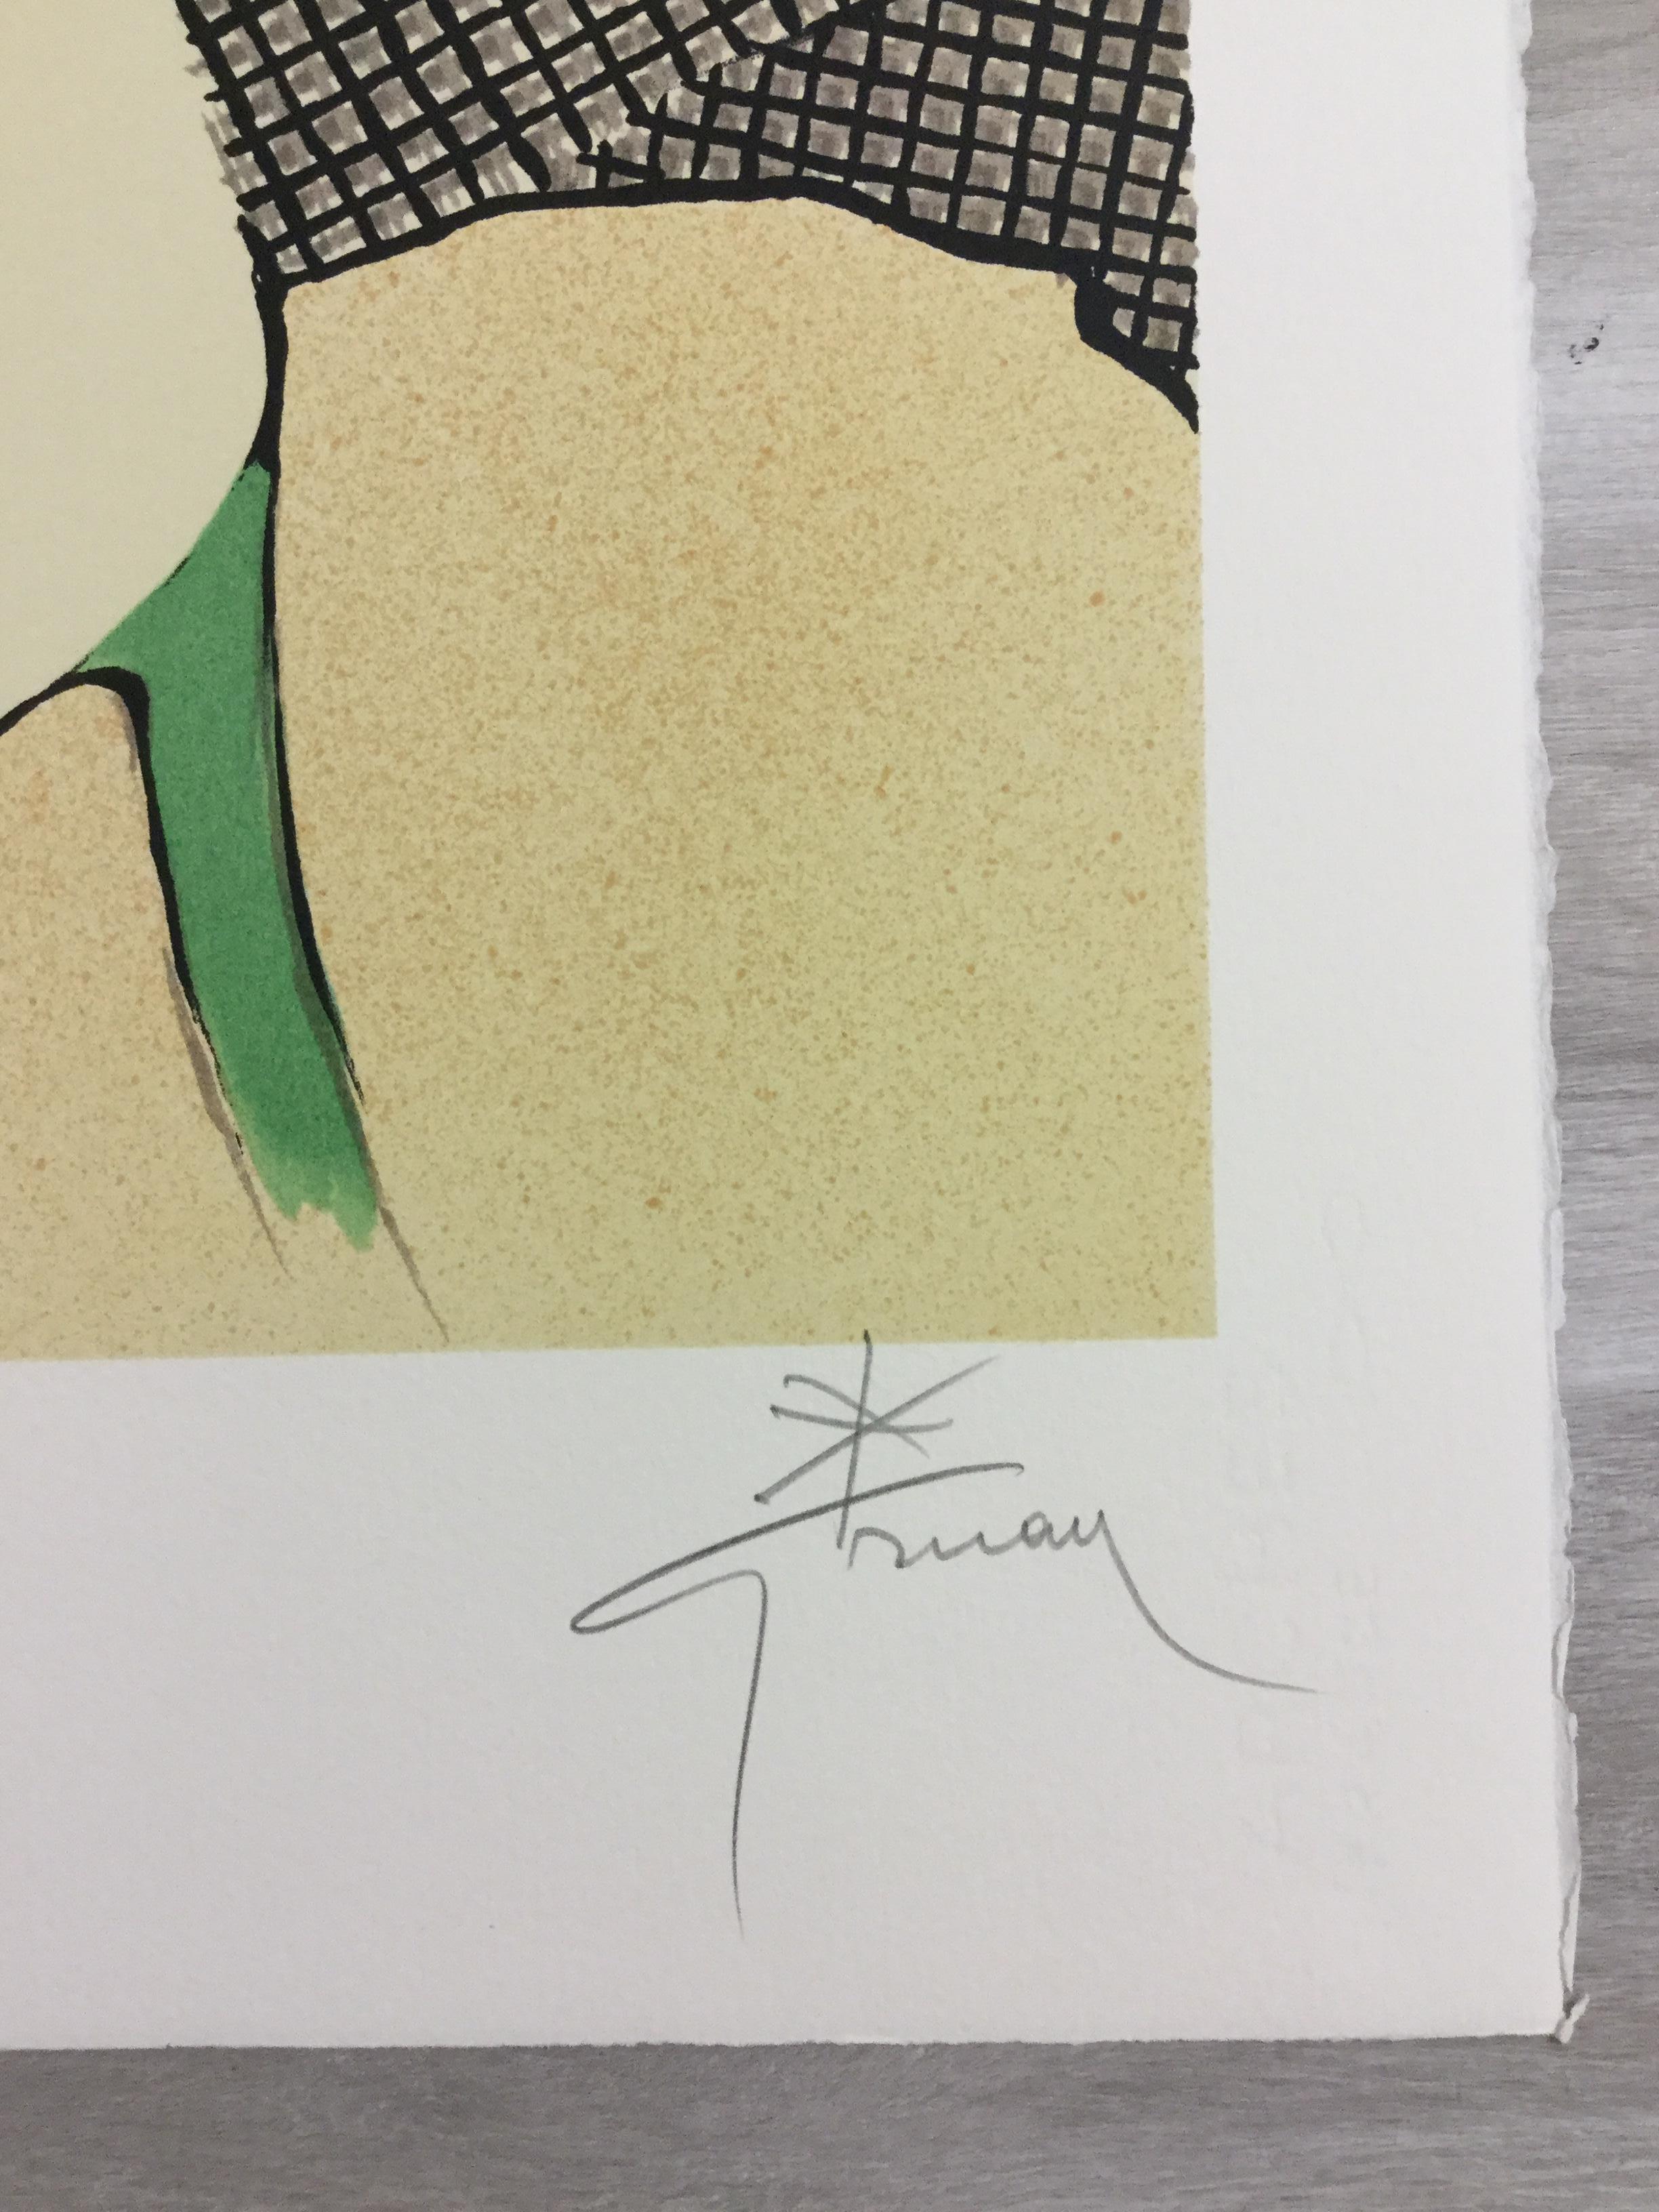 For your consideration, is a hand signed lithograph by Italian artist Rene Gruau, a famous fashion illustrator in the 1940s and 1950s. In excellent condition. The dimensions are 28.5